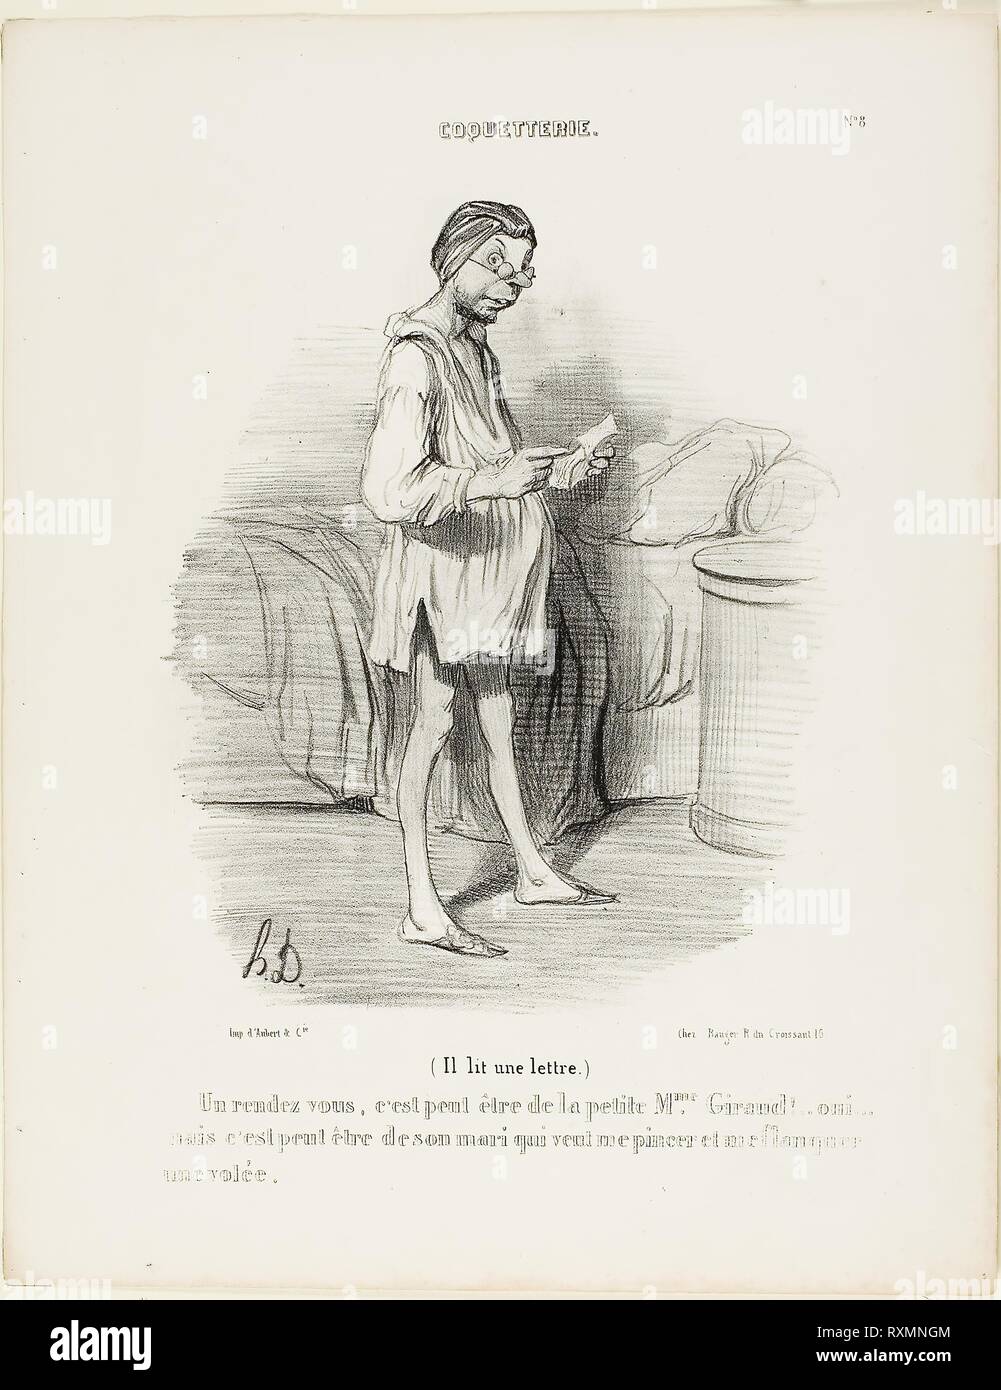 (He is reading a letter) 'A date, could it be from the cute Mme Giraud?? Yes, but it could also come from her husband who wants to pinch me...,' plate 8 from Coquetterie. Honoré Victorin Daumier; French, 1808-1879. Date: 1840. Dimensions: 218 × 182 mm (image); 343 × 267 mm (sheet). Lithograph in black on off-white wove paper. Origin: France. Museum: The Chicago Art Institute. Stock Photo